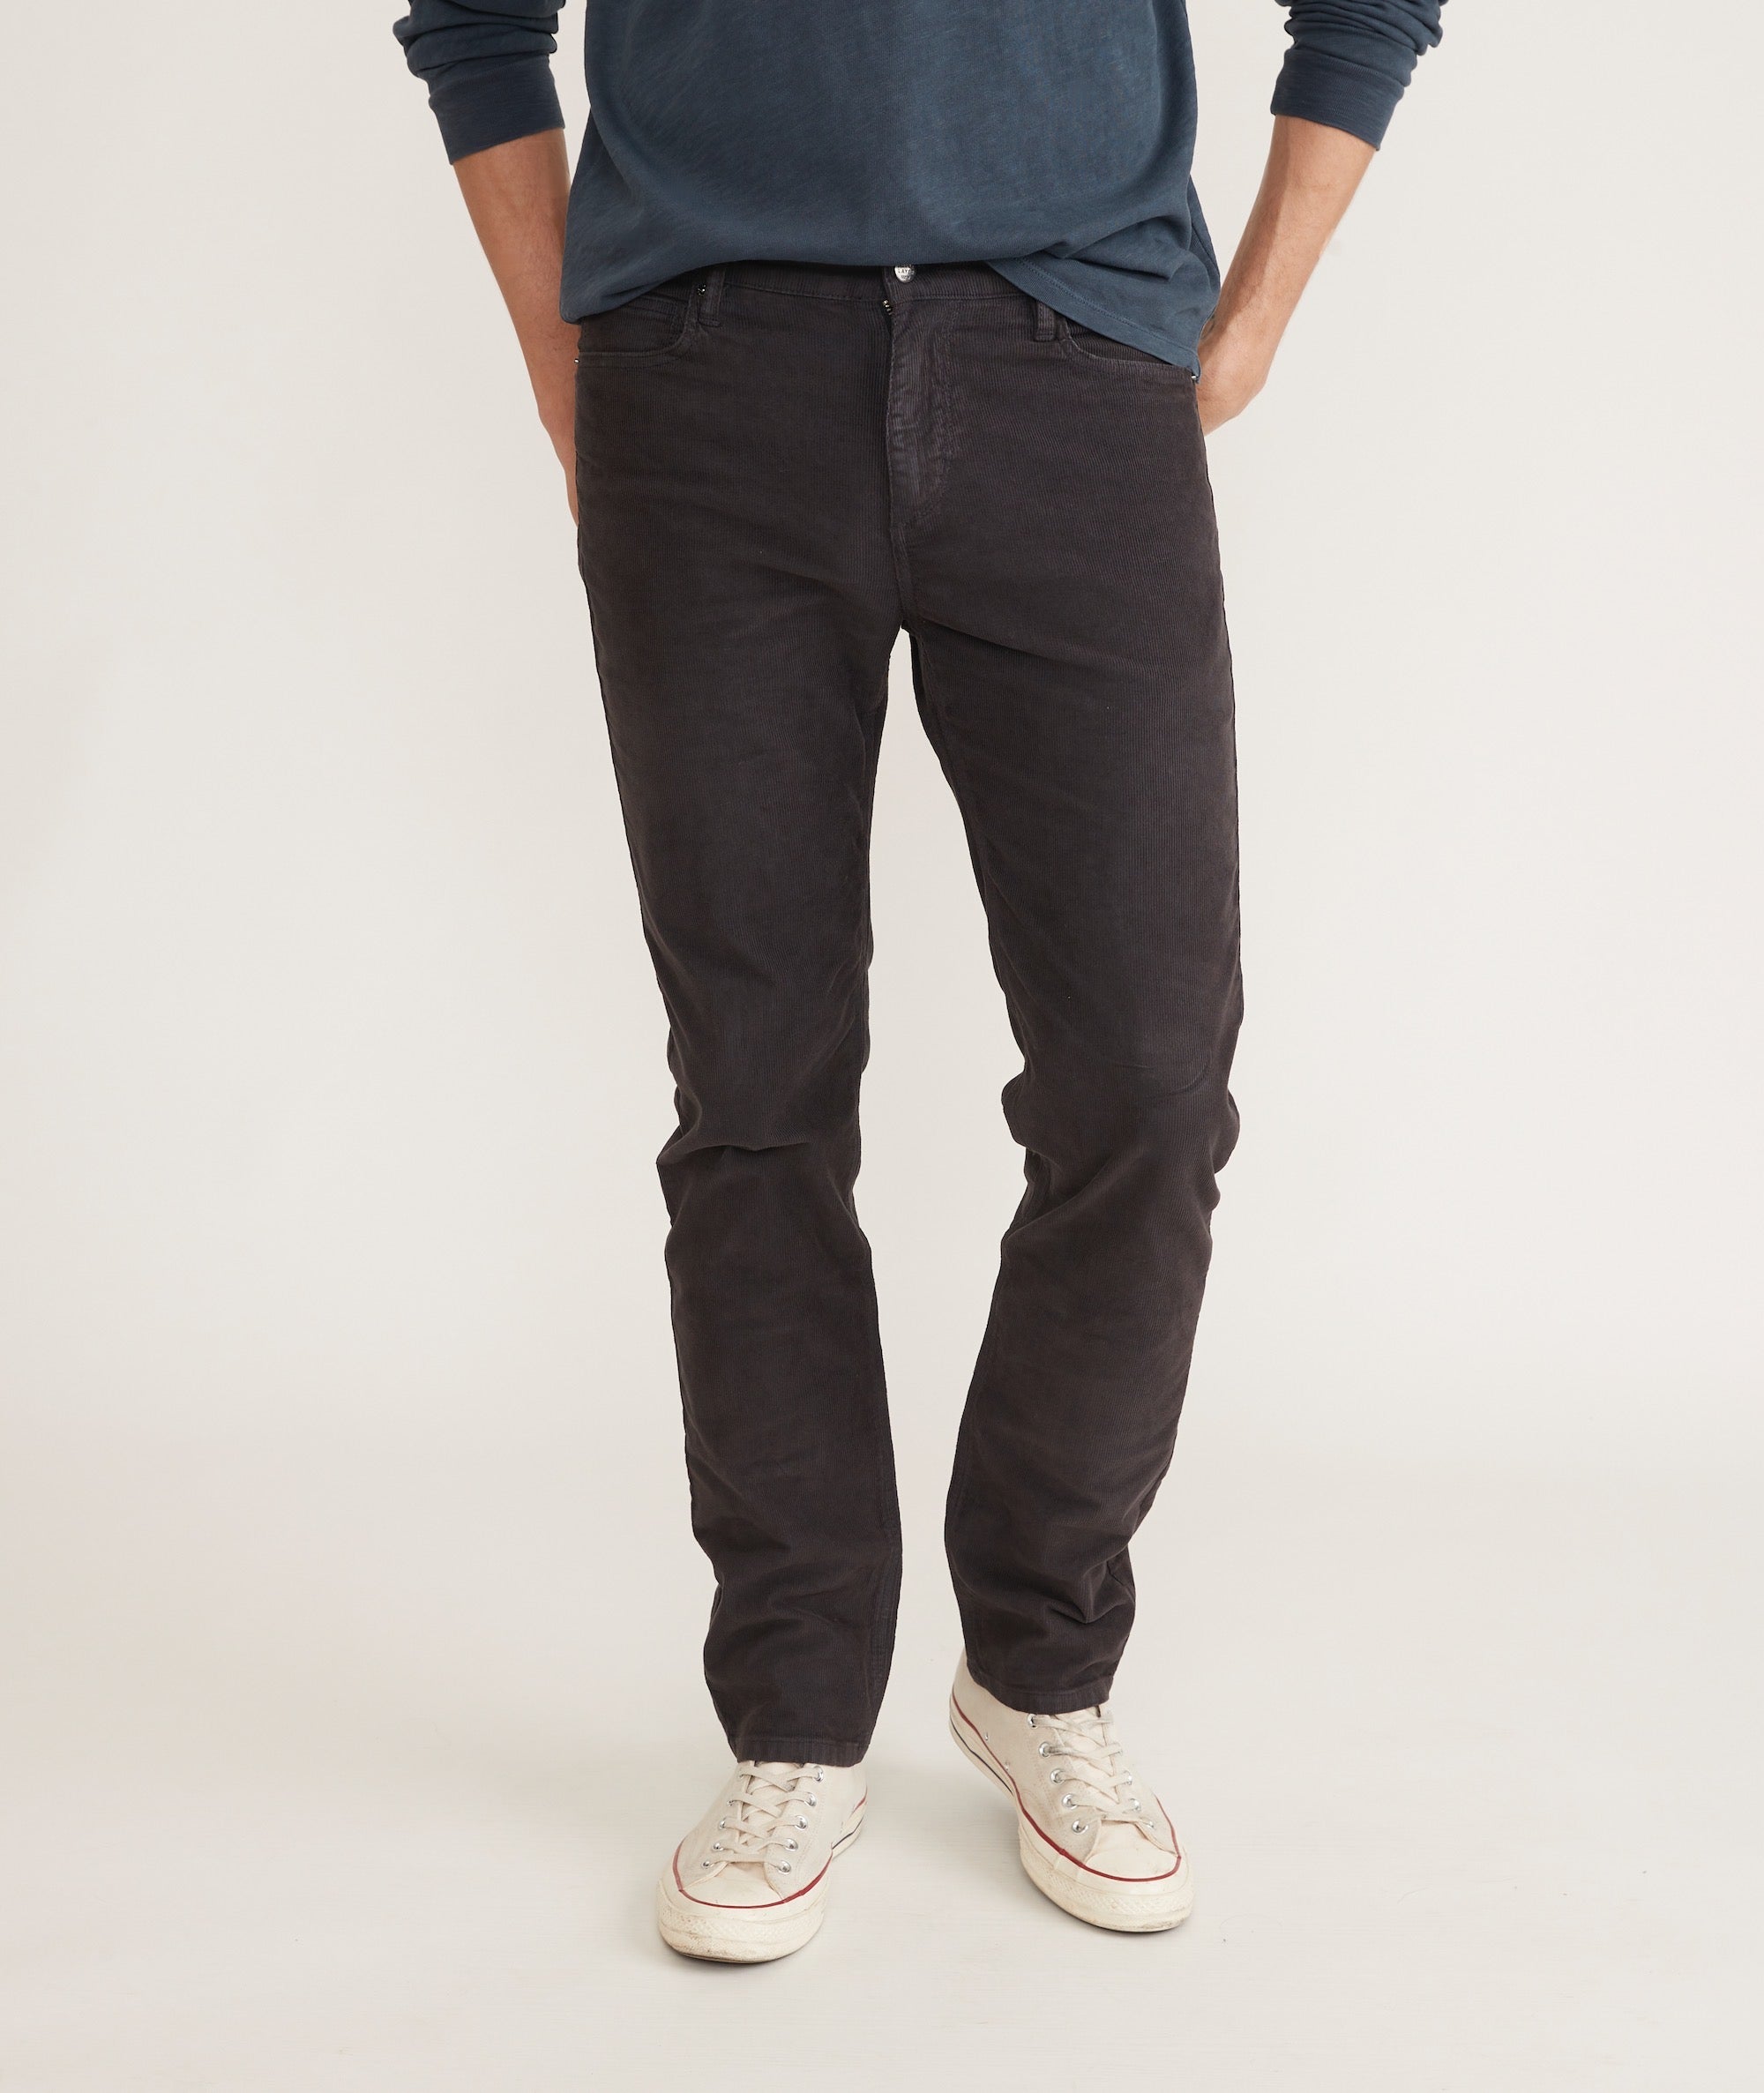 Wide Wale Corduroy Pant in Pants & Shorts | Vince